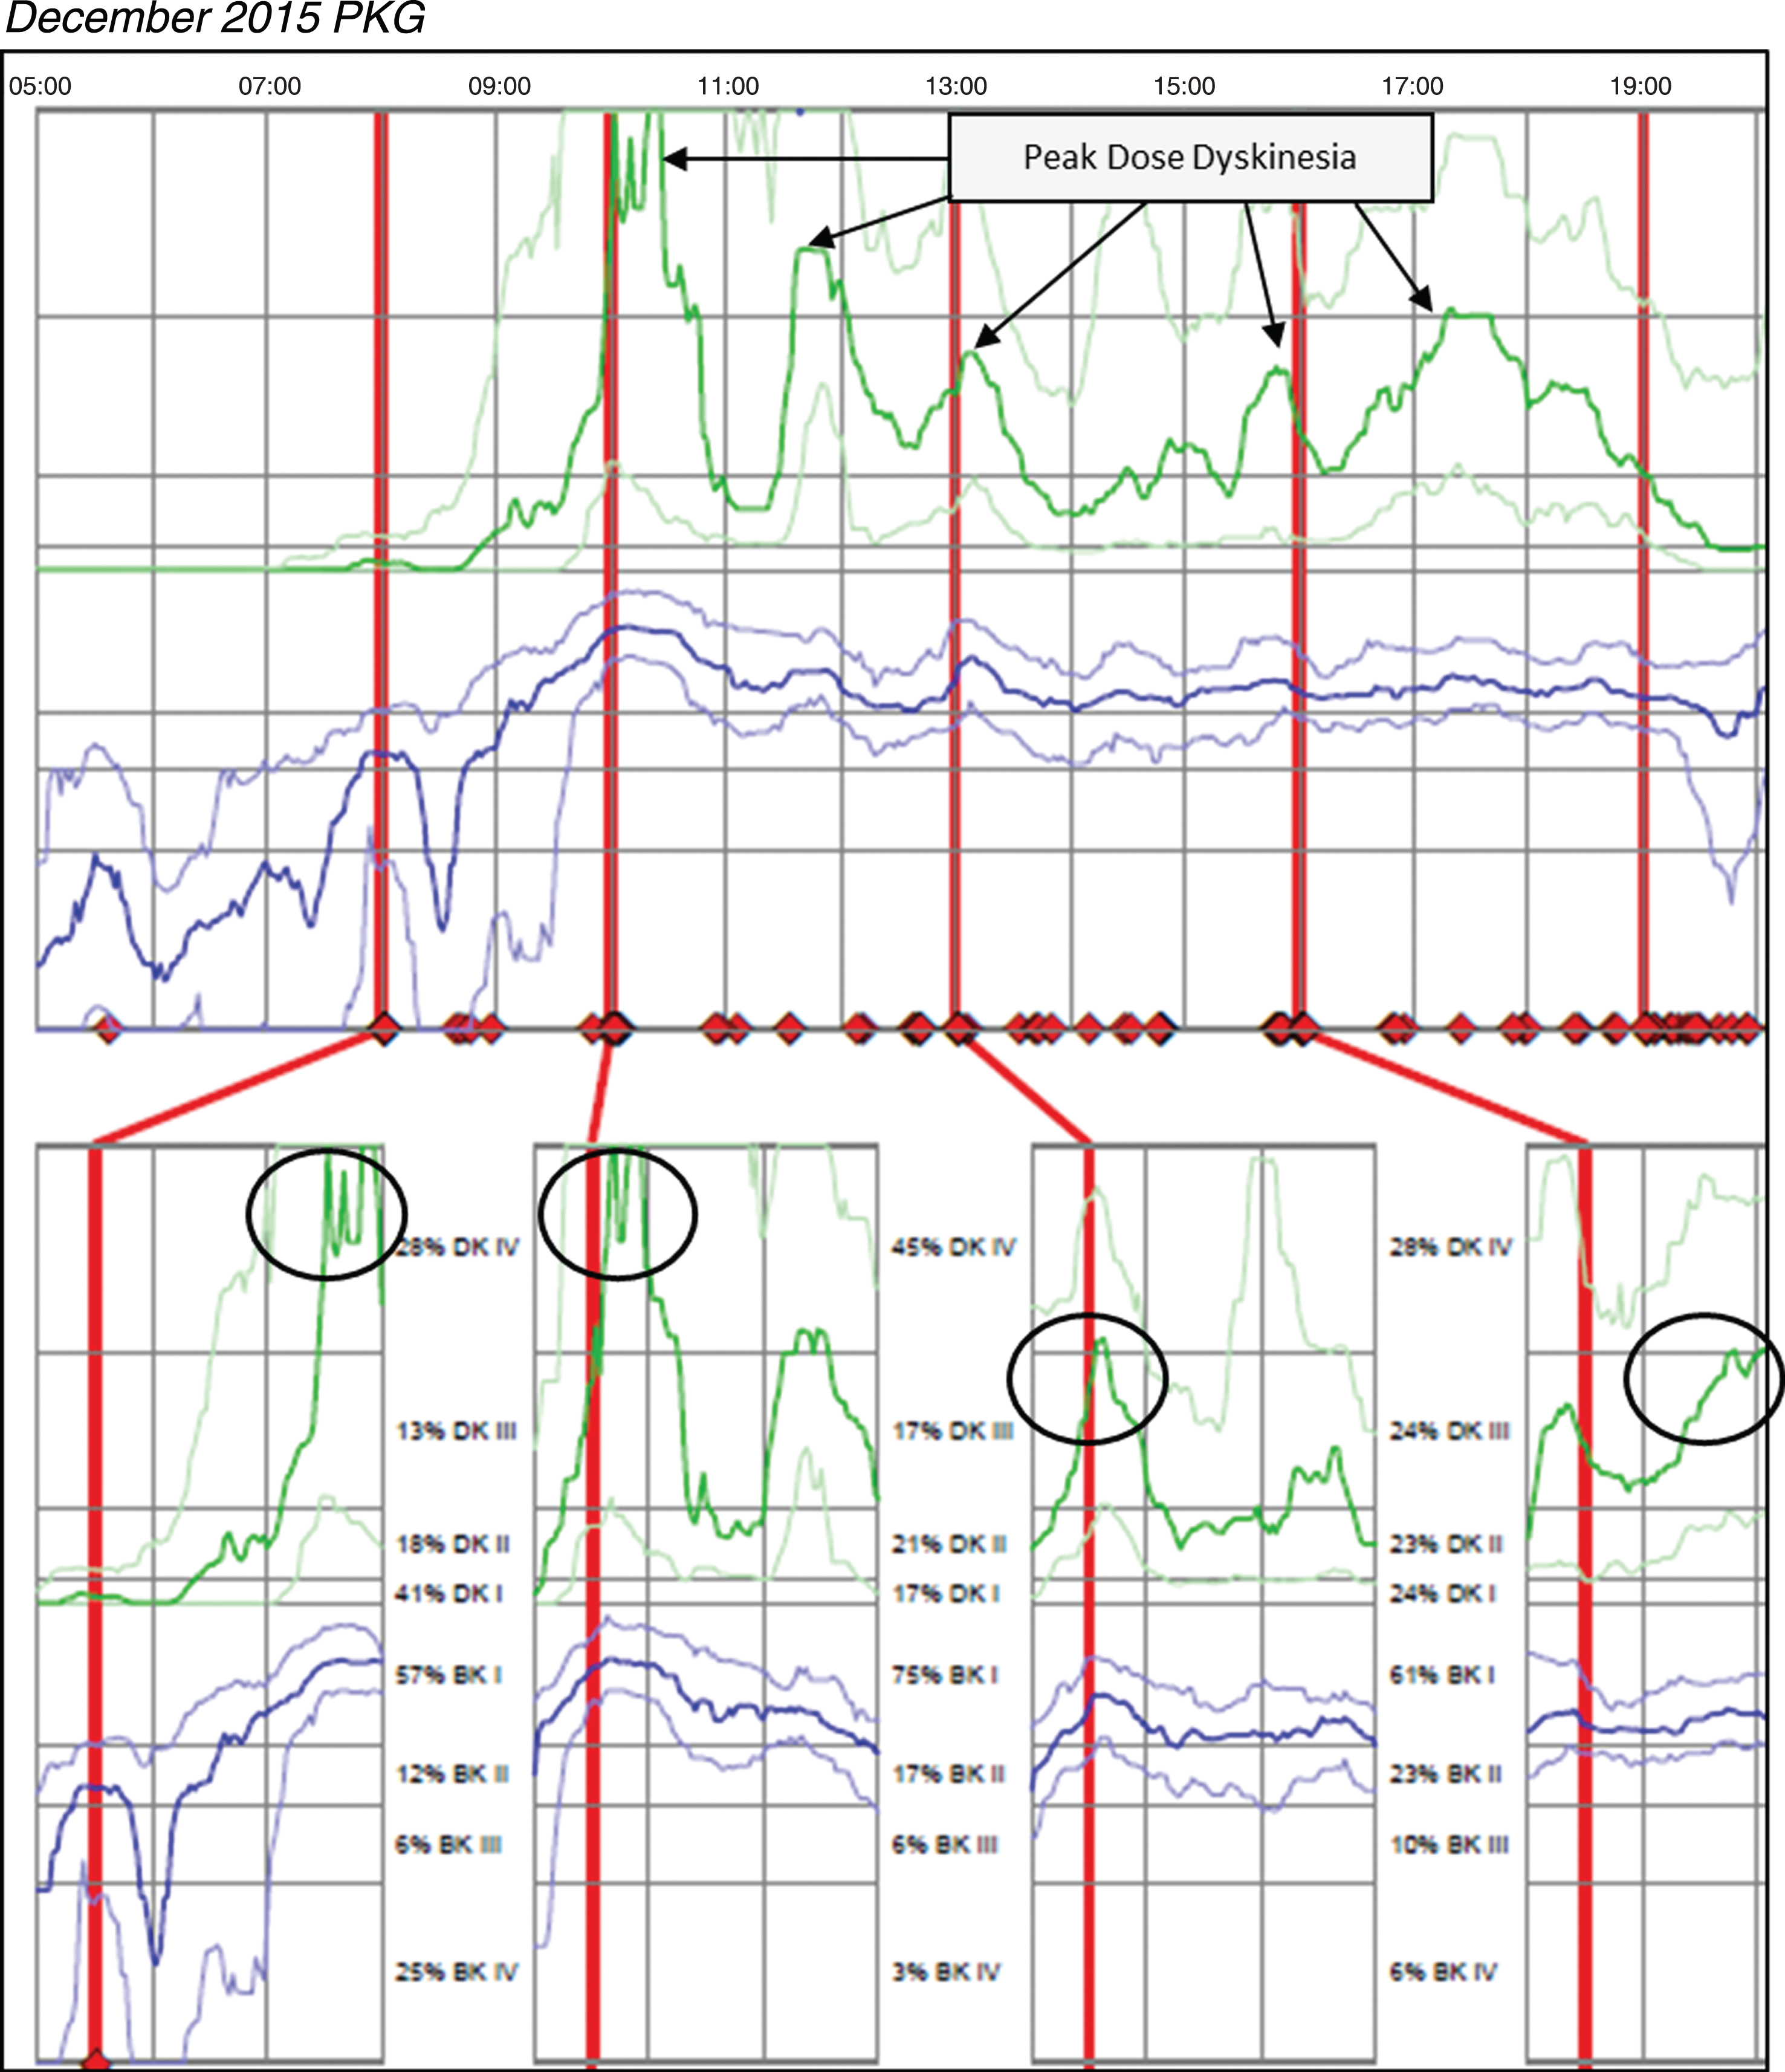 Patient 145 December 2015 PKG: PKG Summary Plot depicts peak dose dyskinesia. Top Image - PKG Summary Plot: Depicts data from recording day aligned to the time of day. It shows when medication reminders were given (vertical red lines), the median DKS (heavy green line) and median BKS (heavy blue line) and their corresponding 25th and 75th percentiles plotted against time of day. Bottom Image - PKG Dose Response Curves: Depicts data from recording day aligned to the time of medication acknowledgement for each individual dose. Programmed medication doses are depicted by vertical red lines. Also illustrated are the median DKS (heavy green line) and median BKS (heavy blue line) and their corresponding 25th and 75th percentiles plotted against time of day.